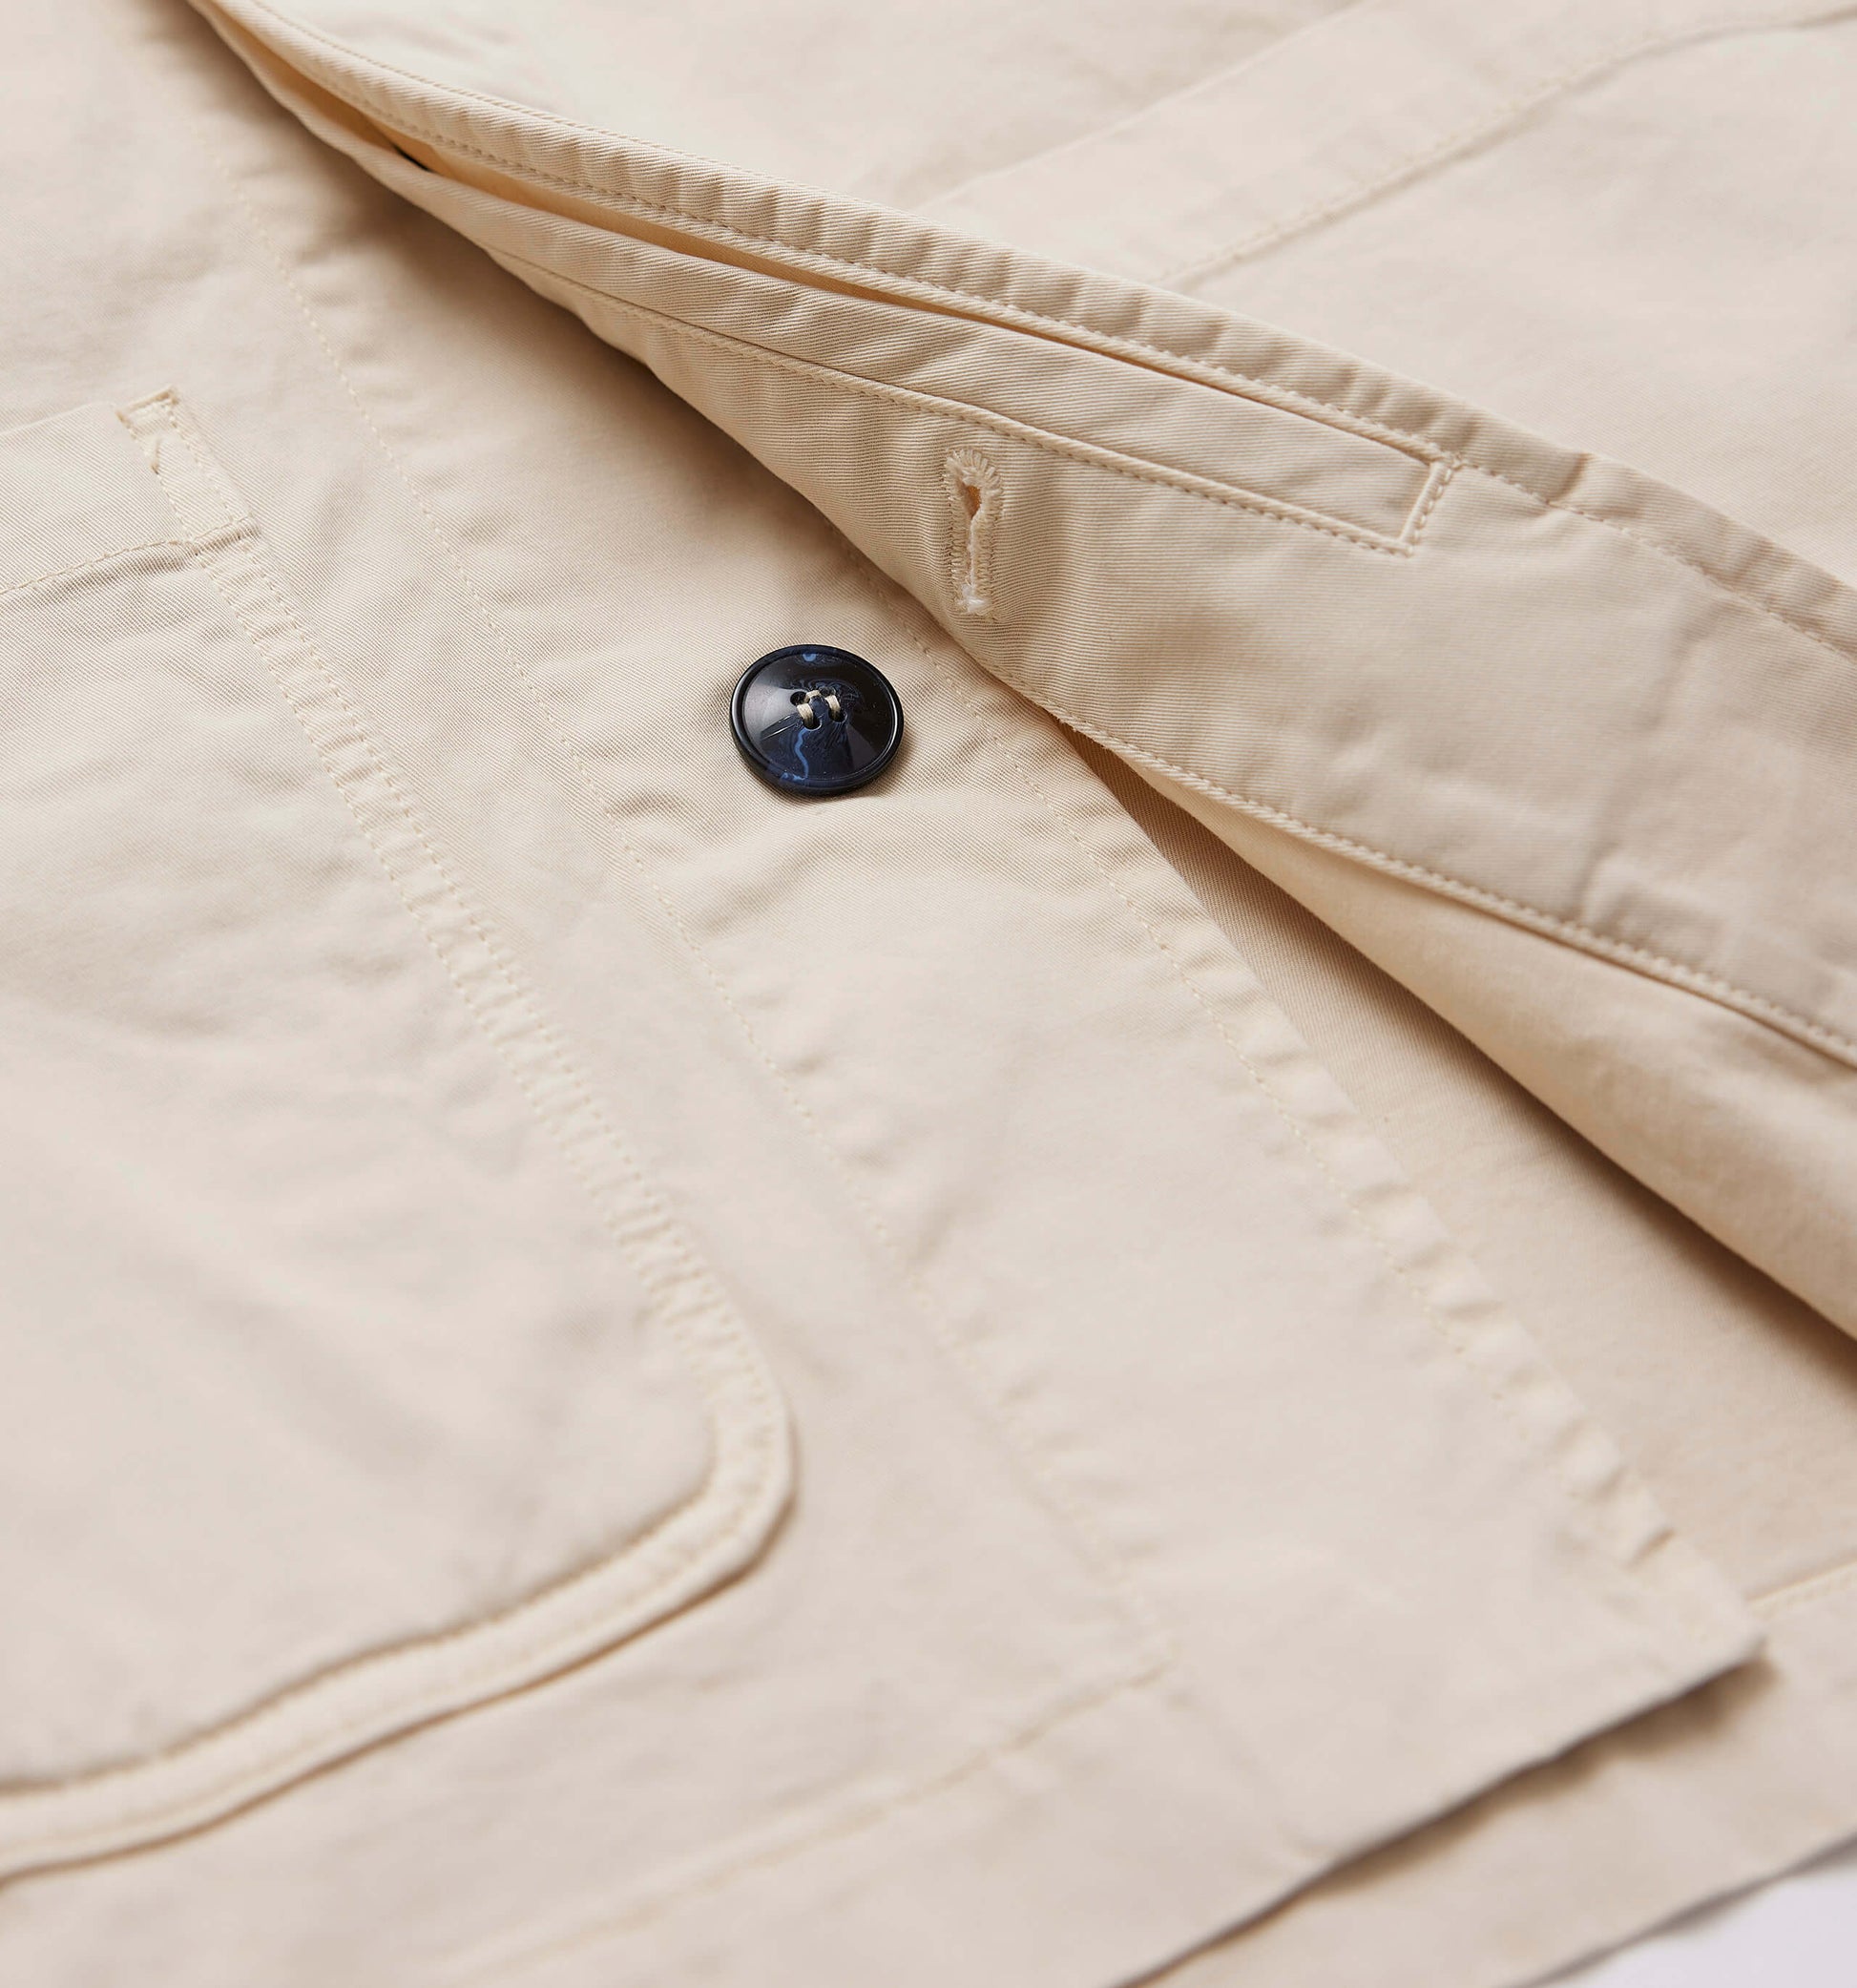 The Benjamin - Twill Stretch-Cotton Overshirt In Beige From King Essentials